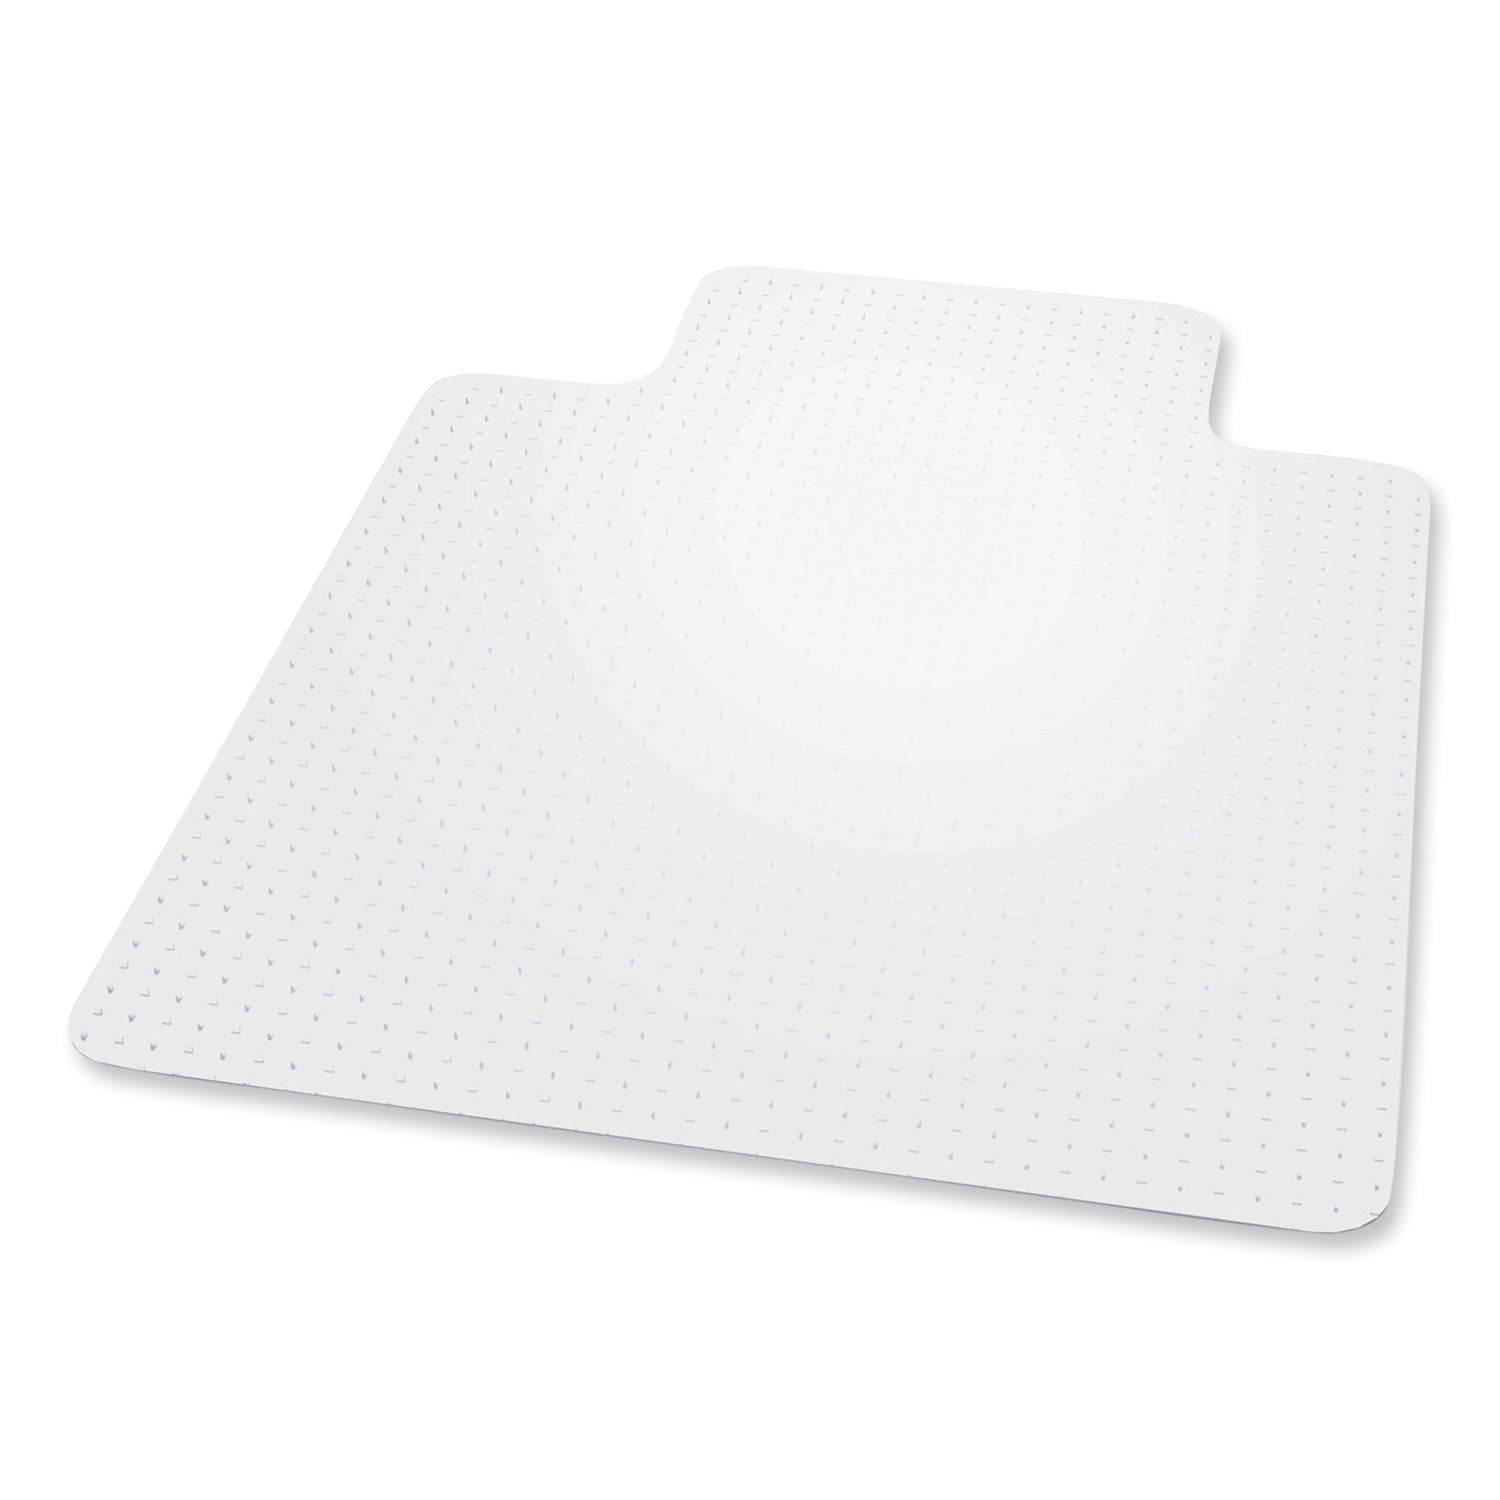 everlife-chair-mat-for-high-pile-carpet-with-lip-46-x-60-clear-ships-in-4-6-business-days_esr124386 - 1